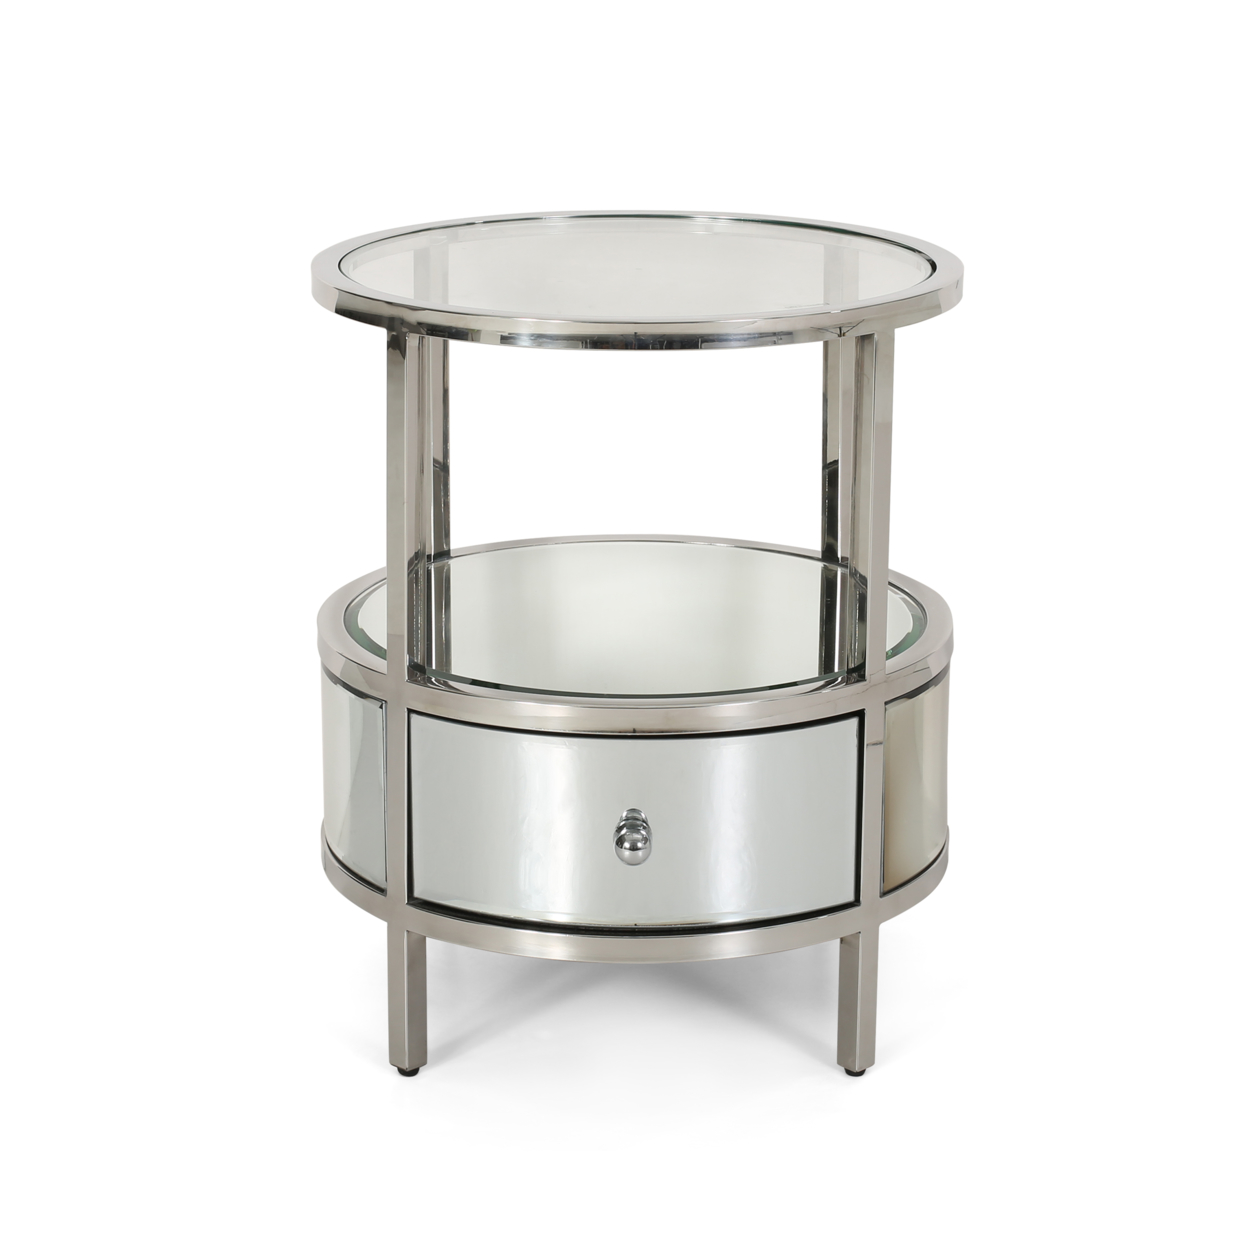 Cytheria Modern Round End Table With Tempered Glass Drawers And Stainless Steel Frame